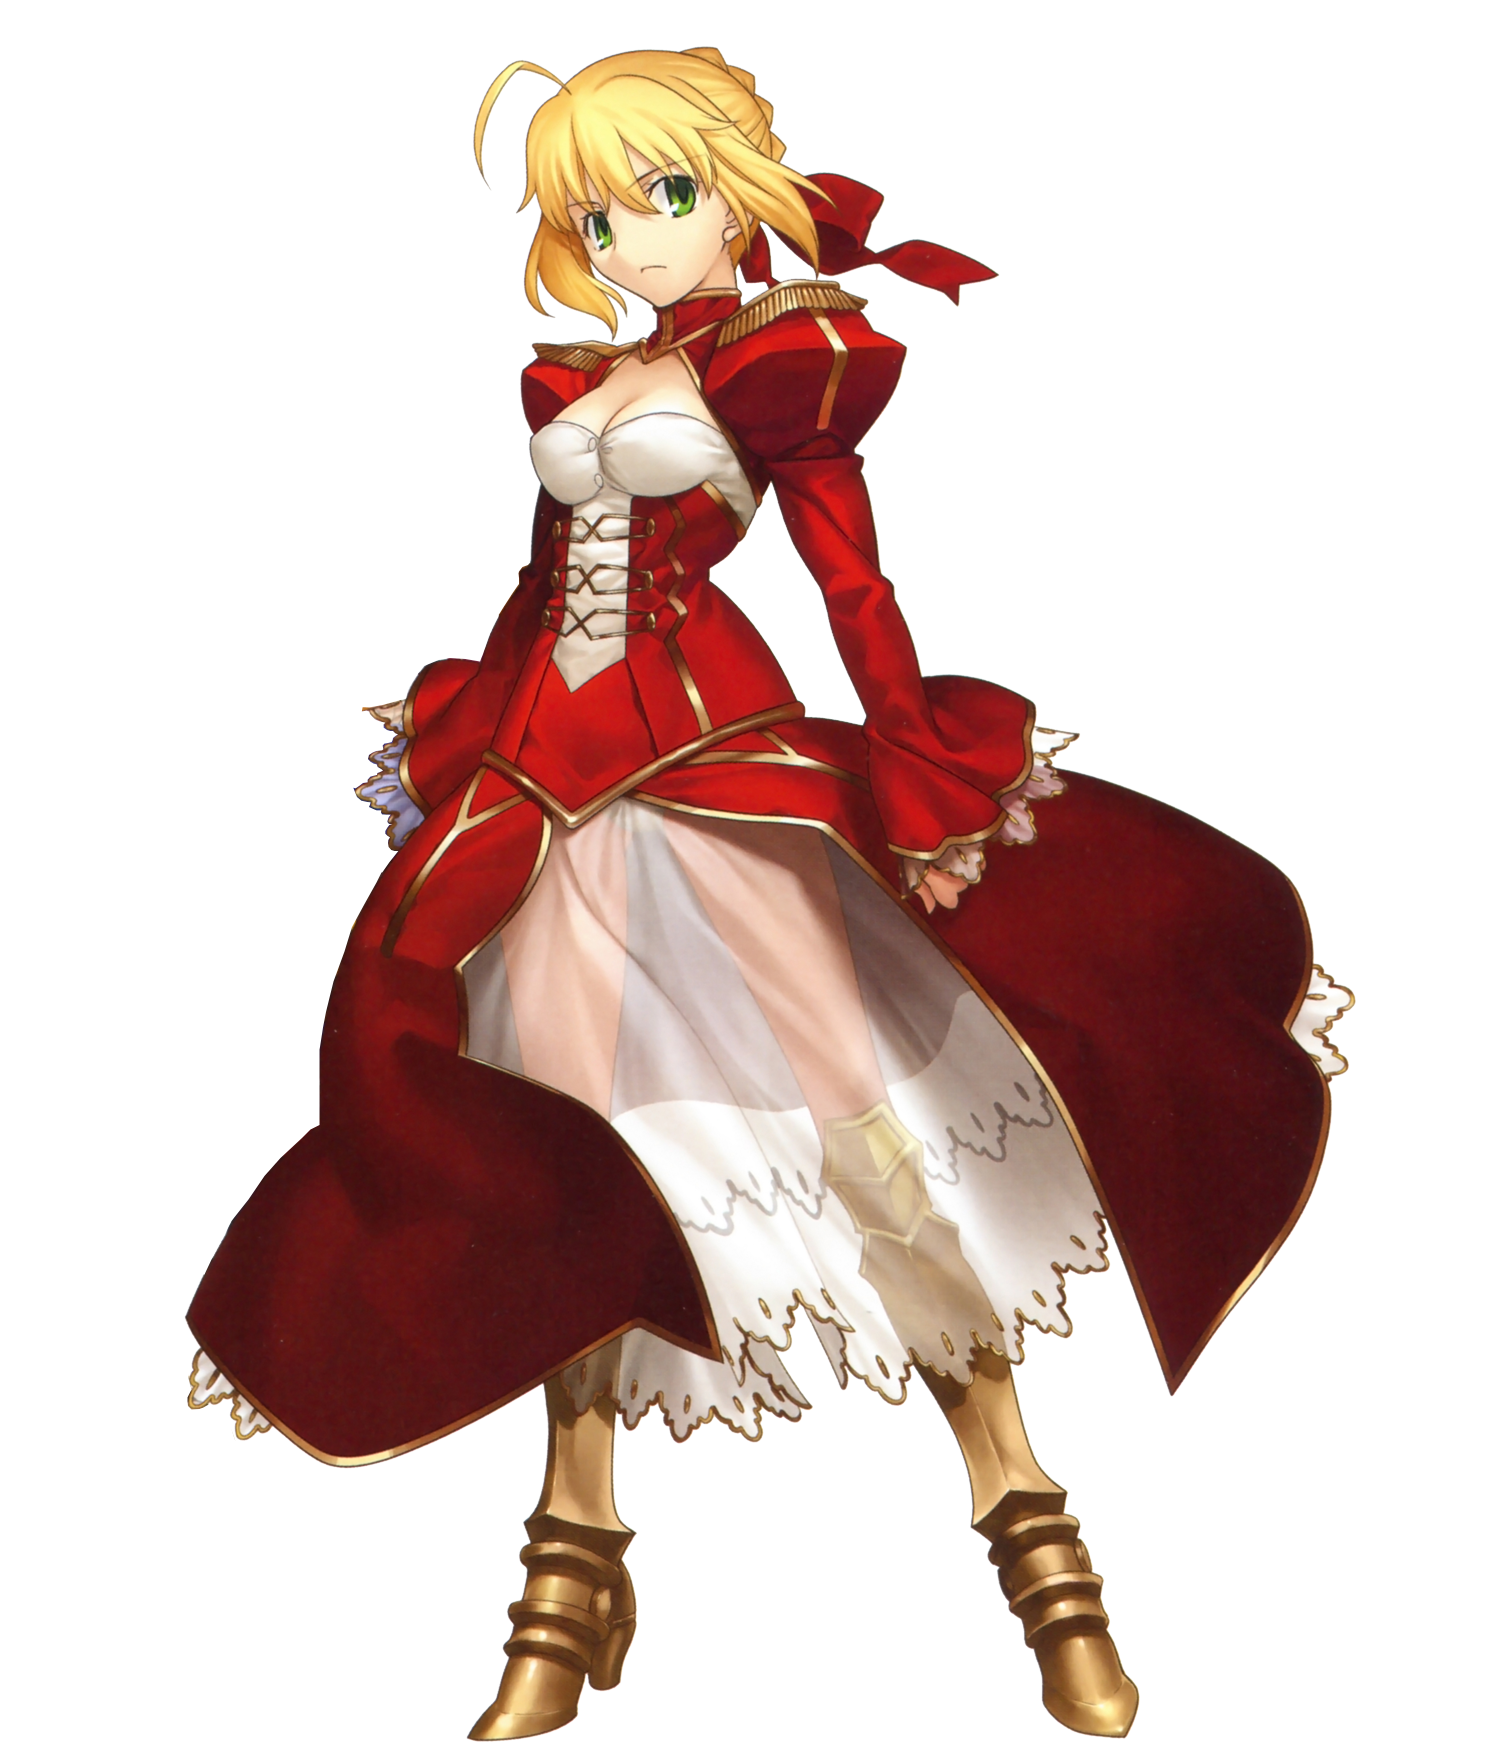 http://static3.wikia.nocookie.net/__cb20130522220216/typemoon/images/f/f0/Saber_protagonist_extra.png